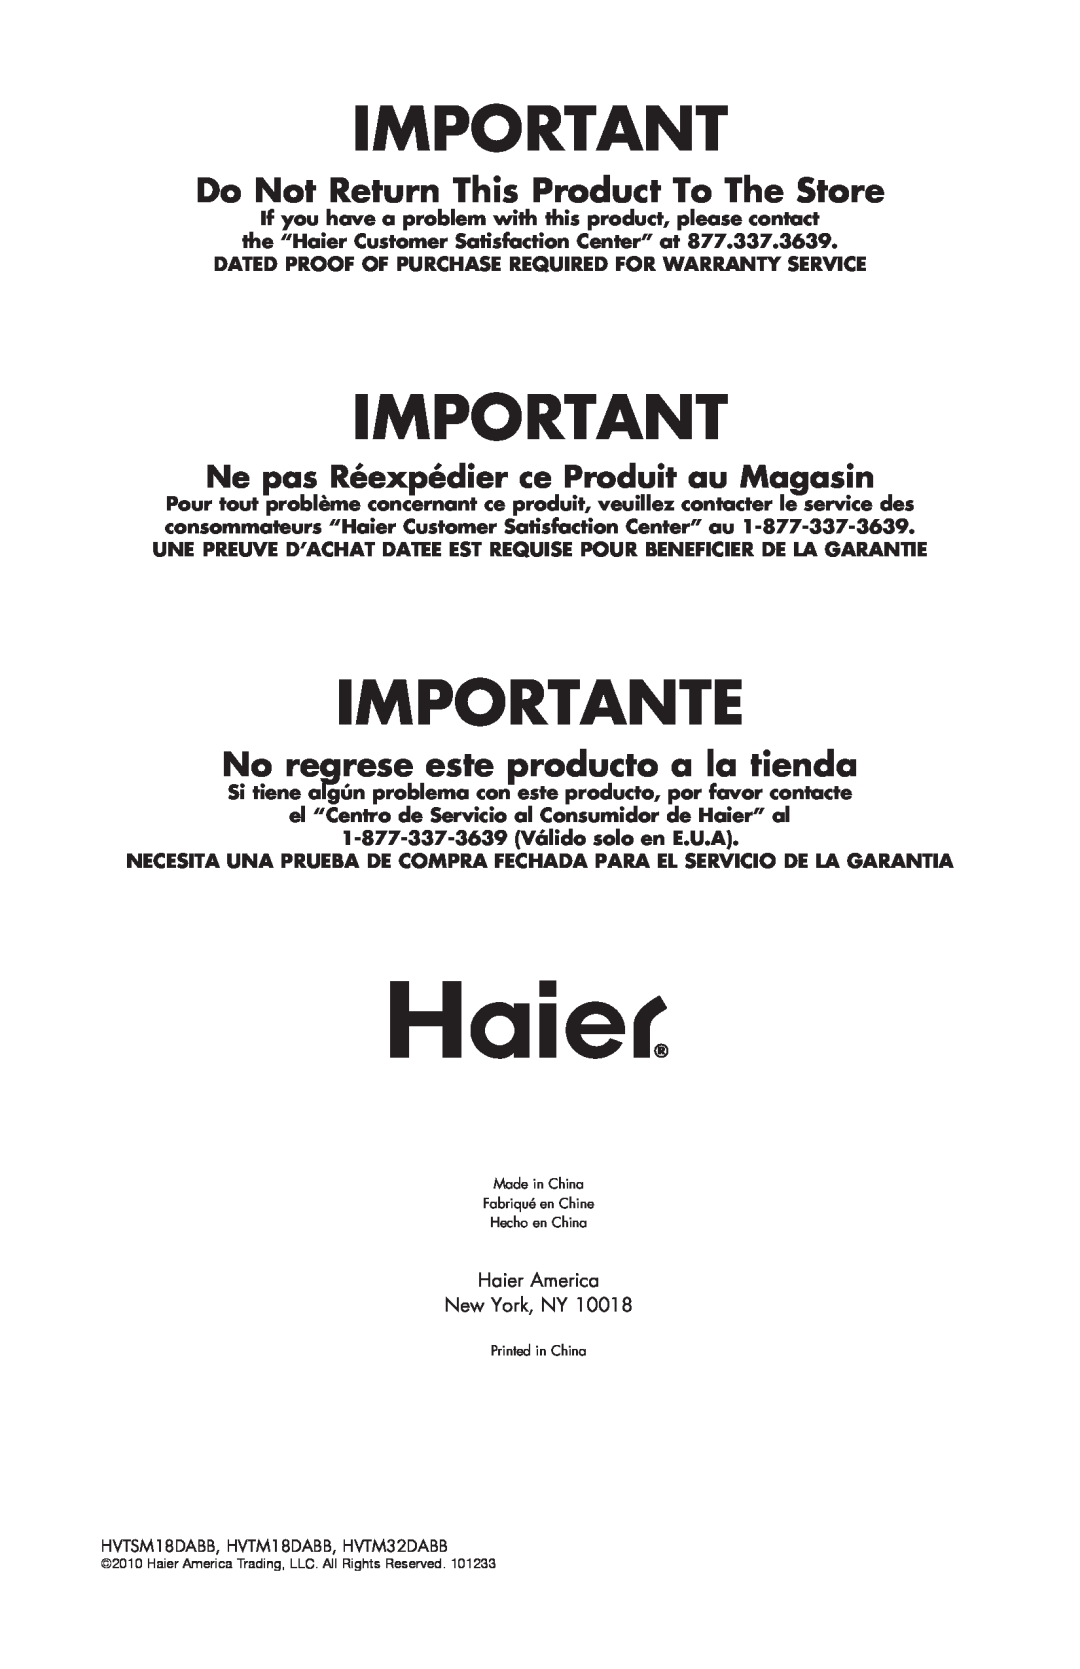 Haier HVTM18DABB, HVTM32DABB Importante, Do Not Return This Product To The Store, No regrese este producto a la tienda 